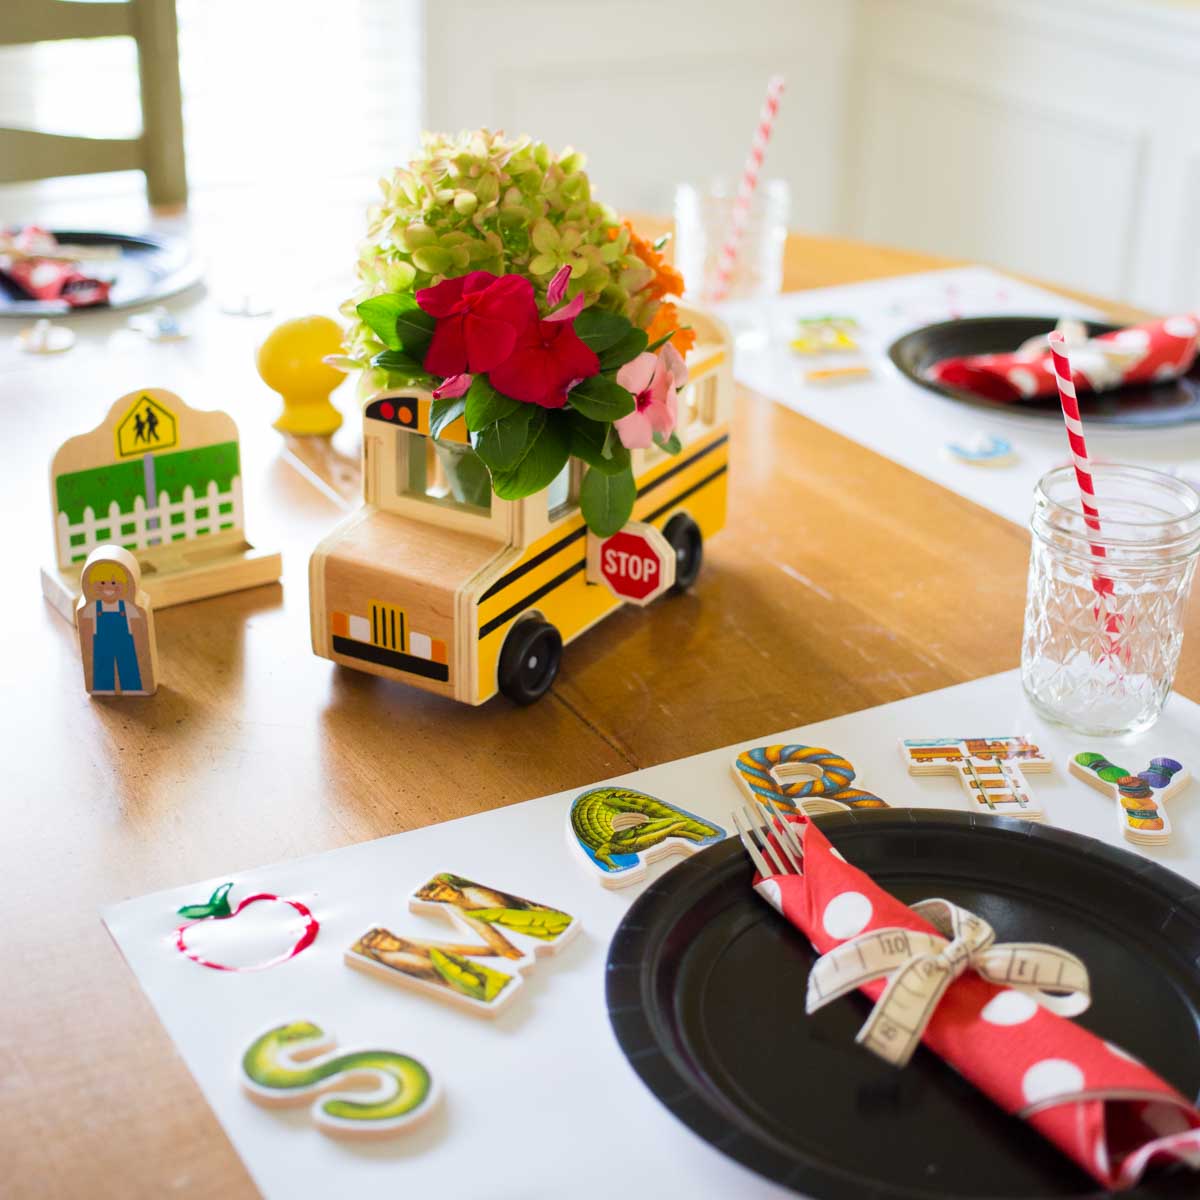 A table is set with a school bus floral centerpiece and cute ABC puzzle messages at each place setting.